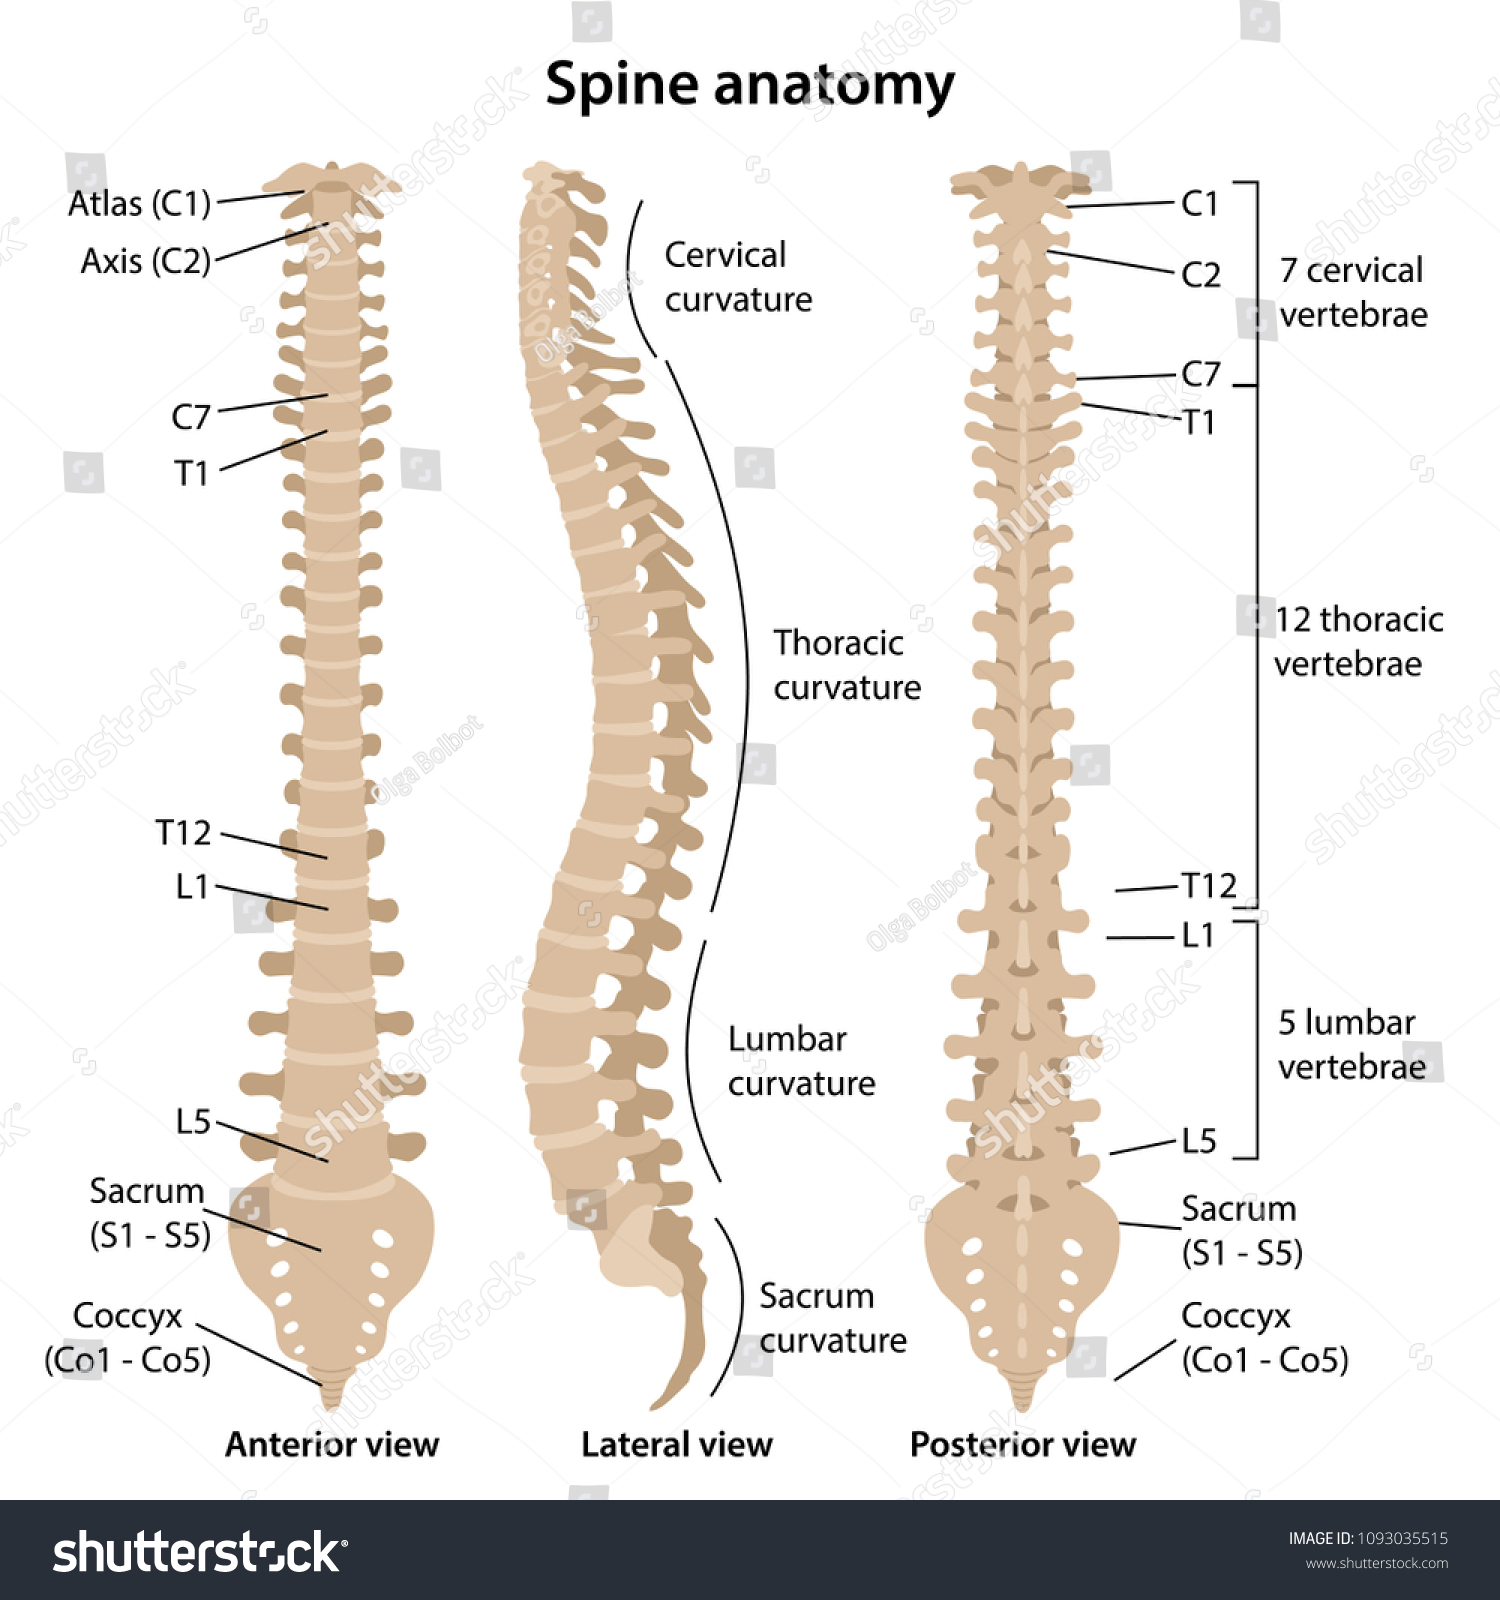 2,739 Human anatomy spine labelled Images, Stock Photos & Vectors